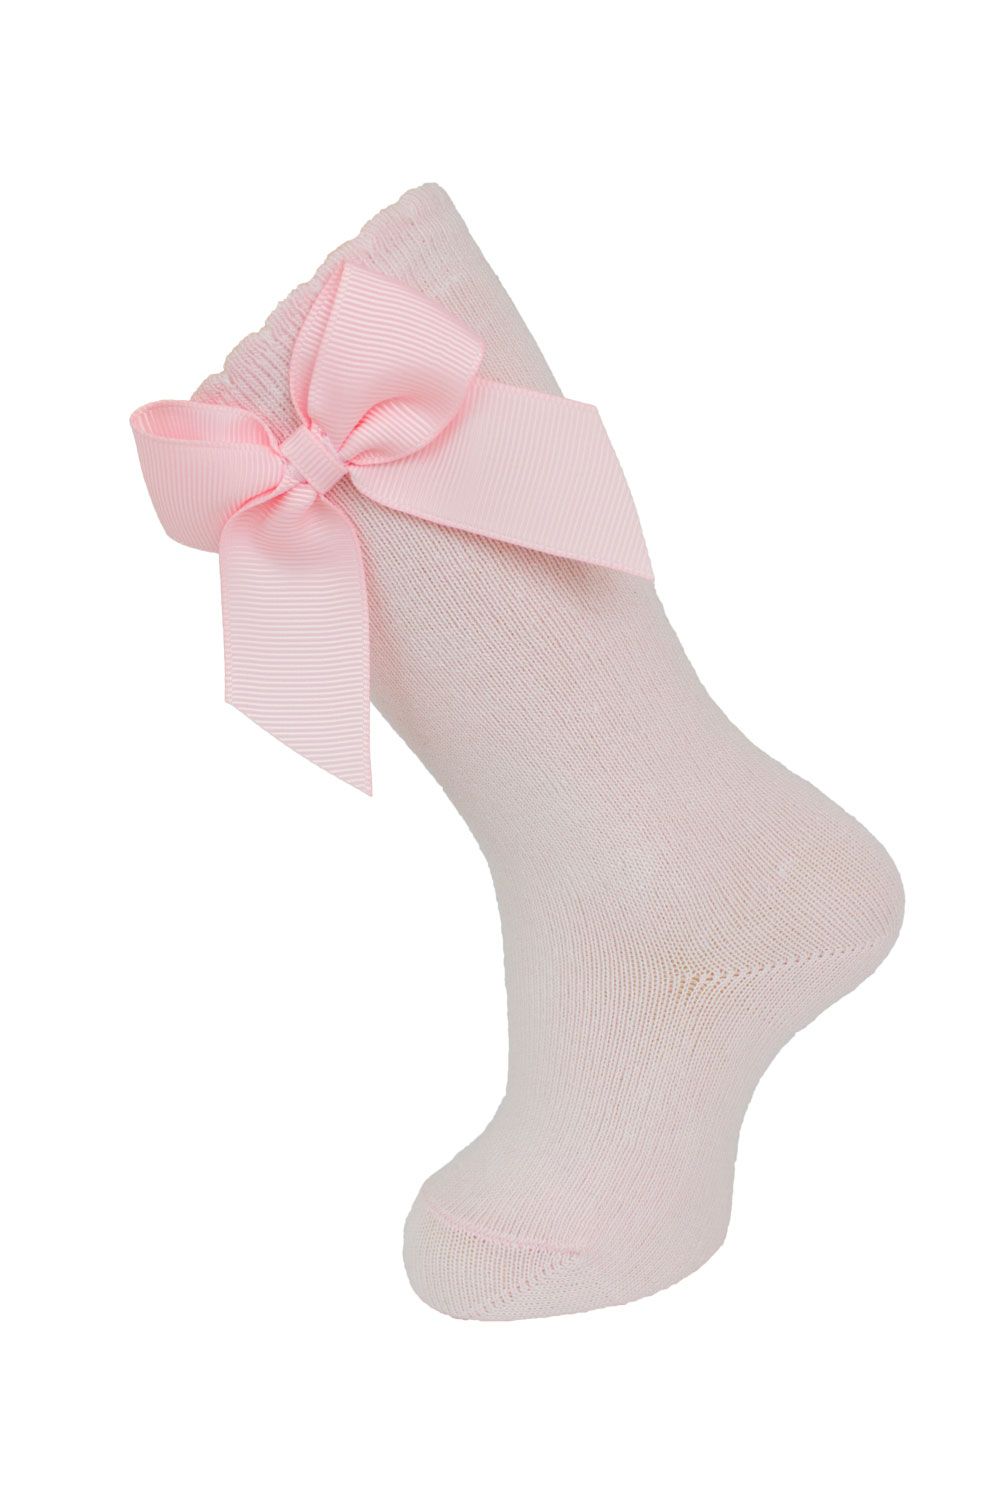 Carlomagno Knee Sock with Gross Grain Side Bow - Pink